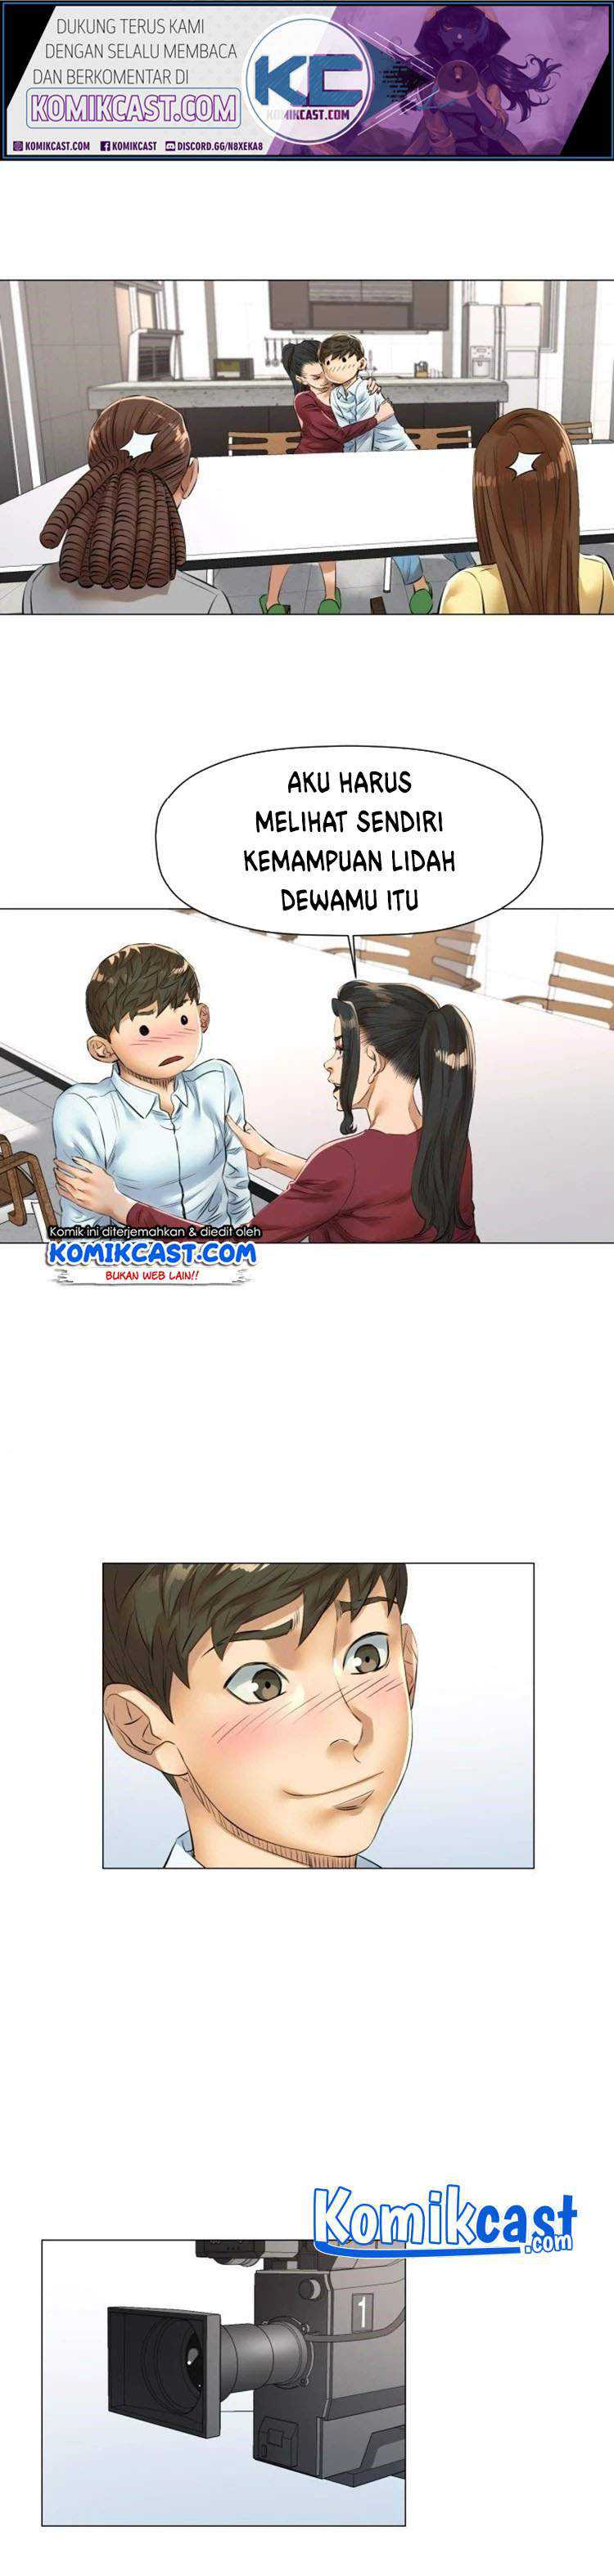 God of Cooking Chapter 34